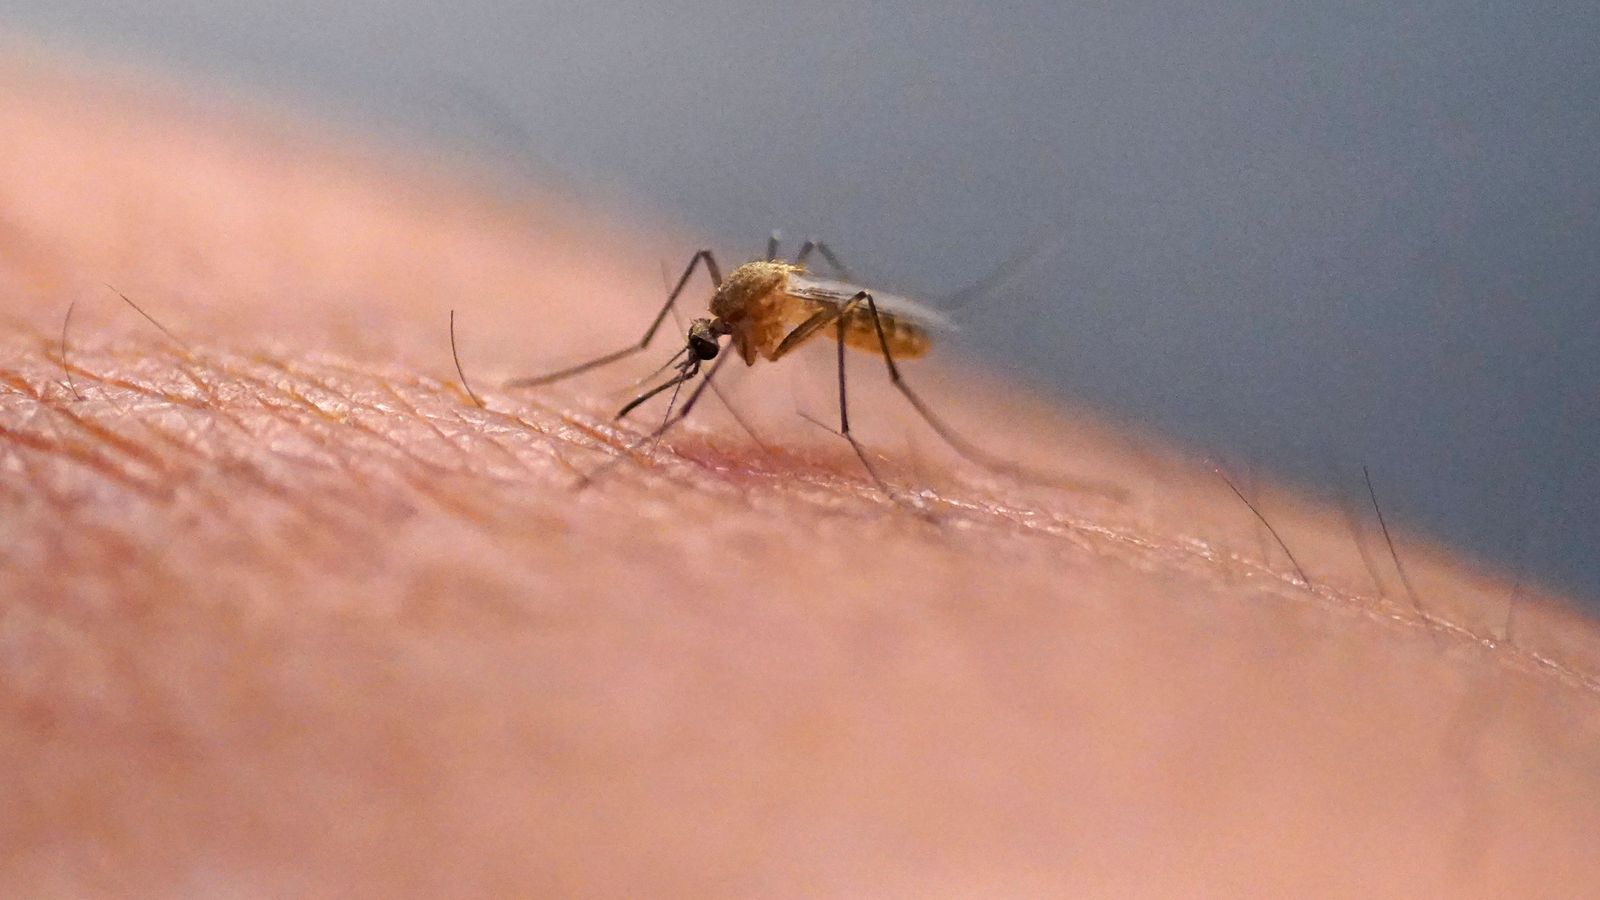 Researchers are now developing ways to predict when and where malaria and dengue epidemics might occur using disease surveillance and climate change d